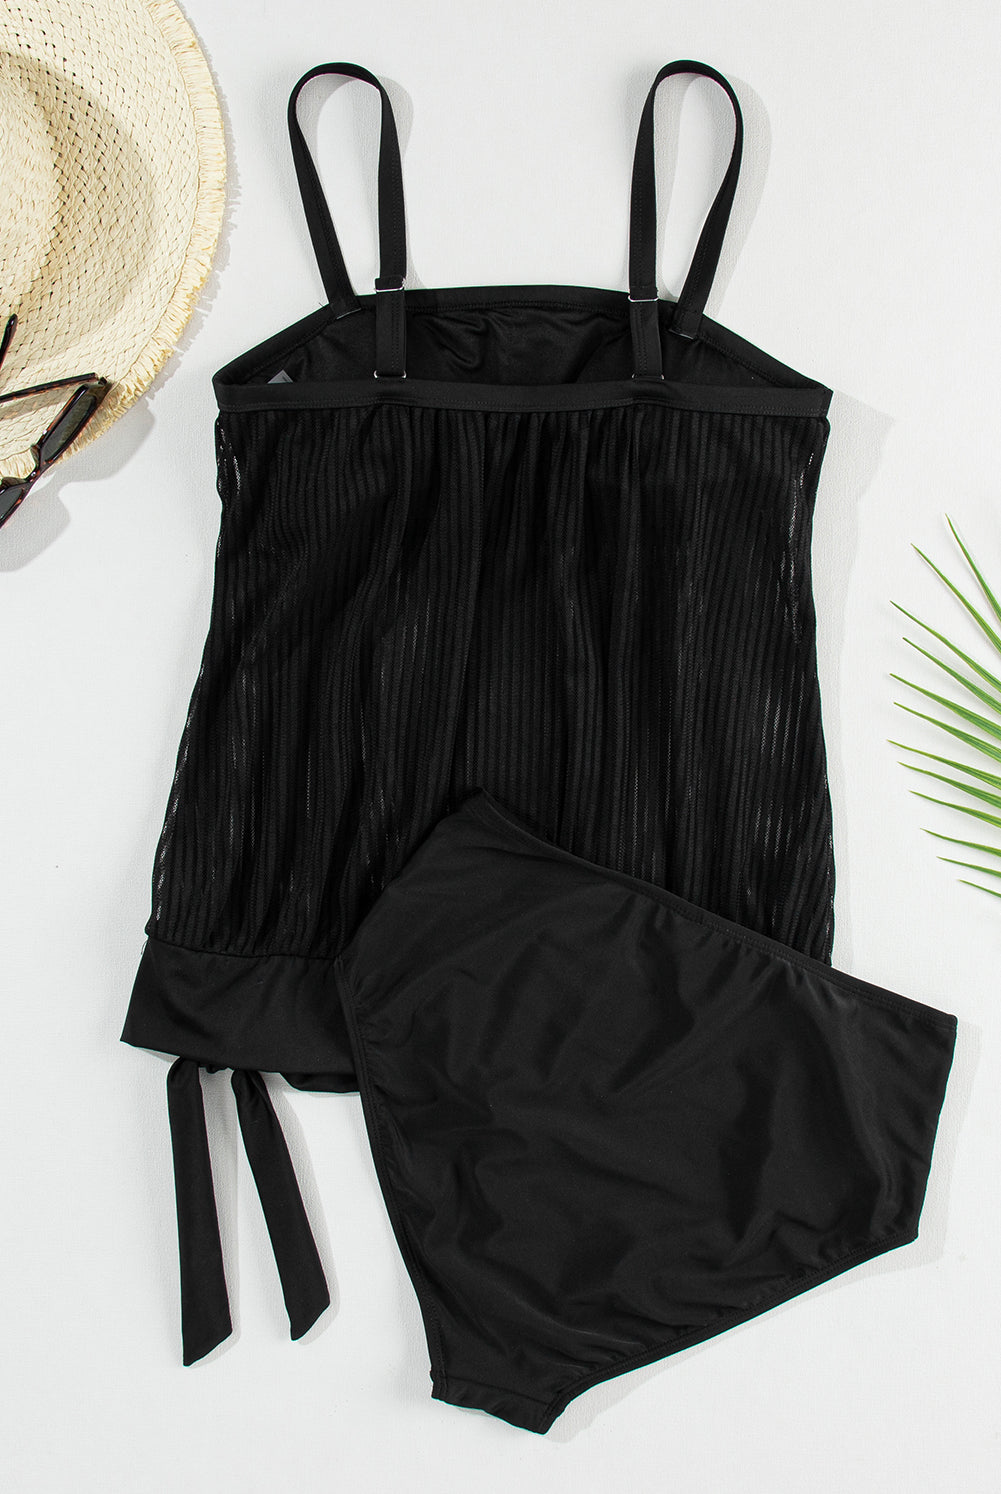 Woman on the beach wearing a square neck spaghetti strap tankini set in black, perfect for summer.